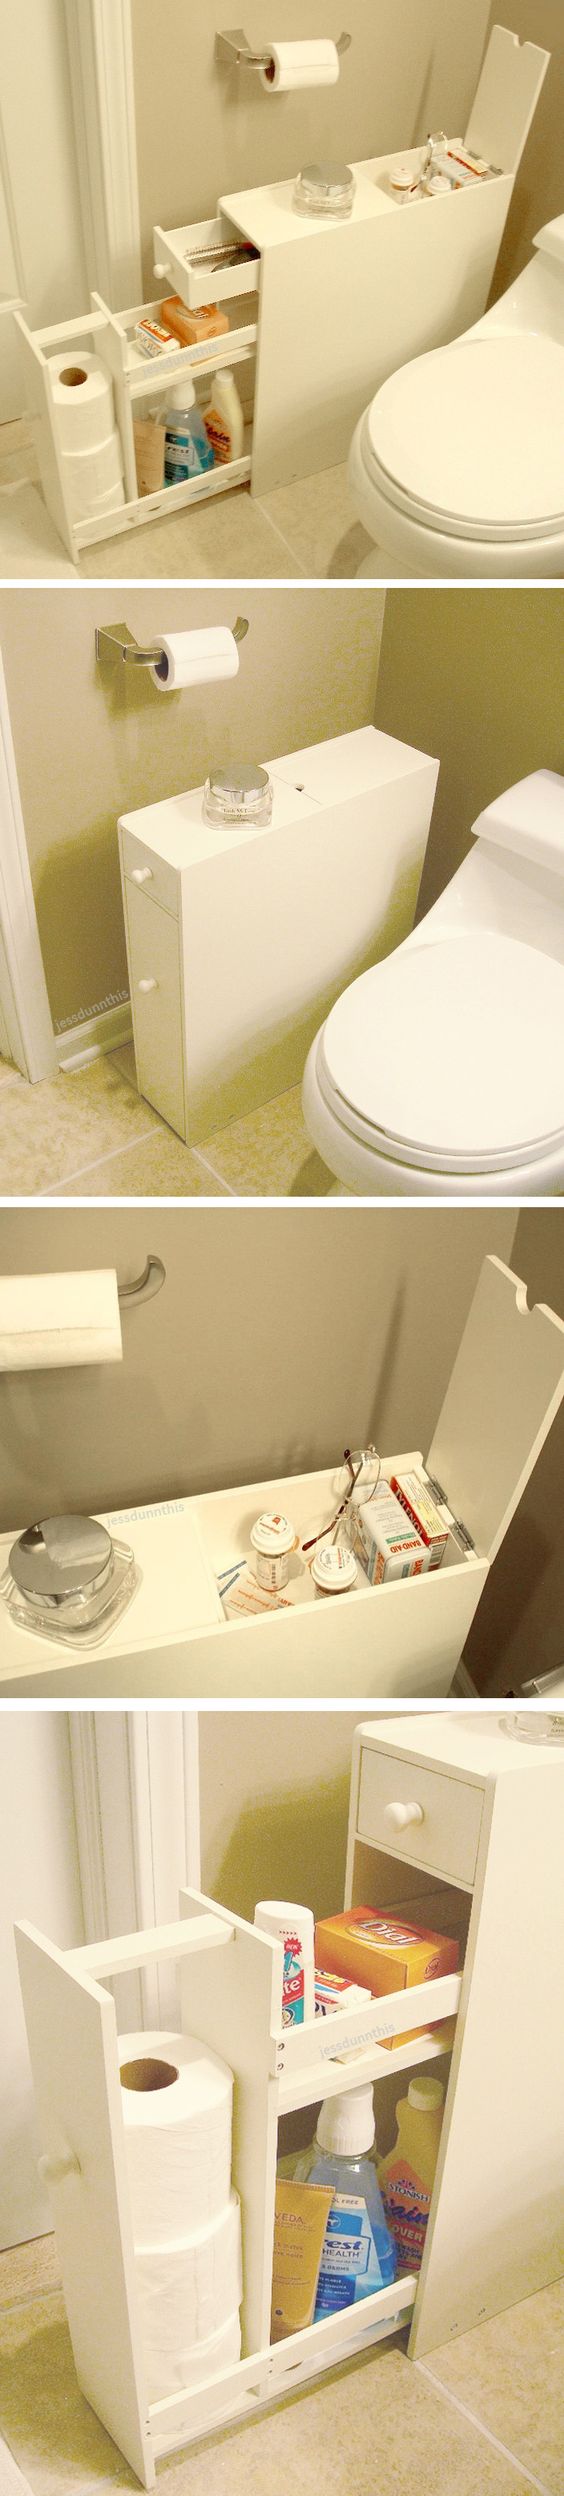 Bathroom space saver floor cabinet // stores up to 12 rolls of toilet paper and fits beside the closet - brilliant idea! #product_design